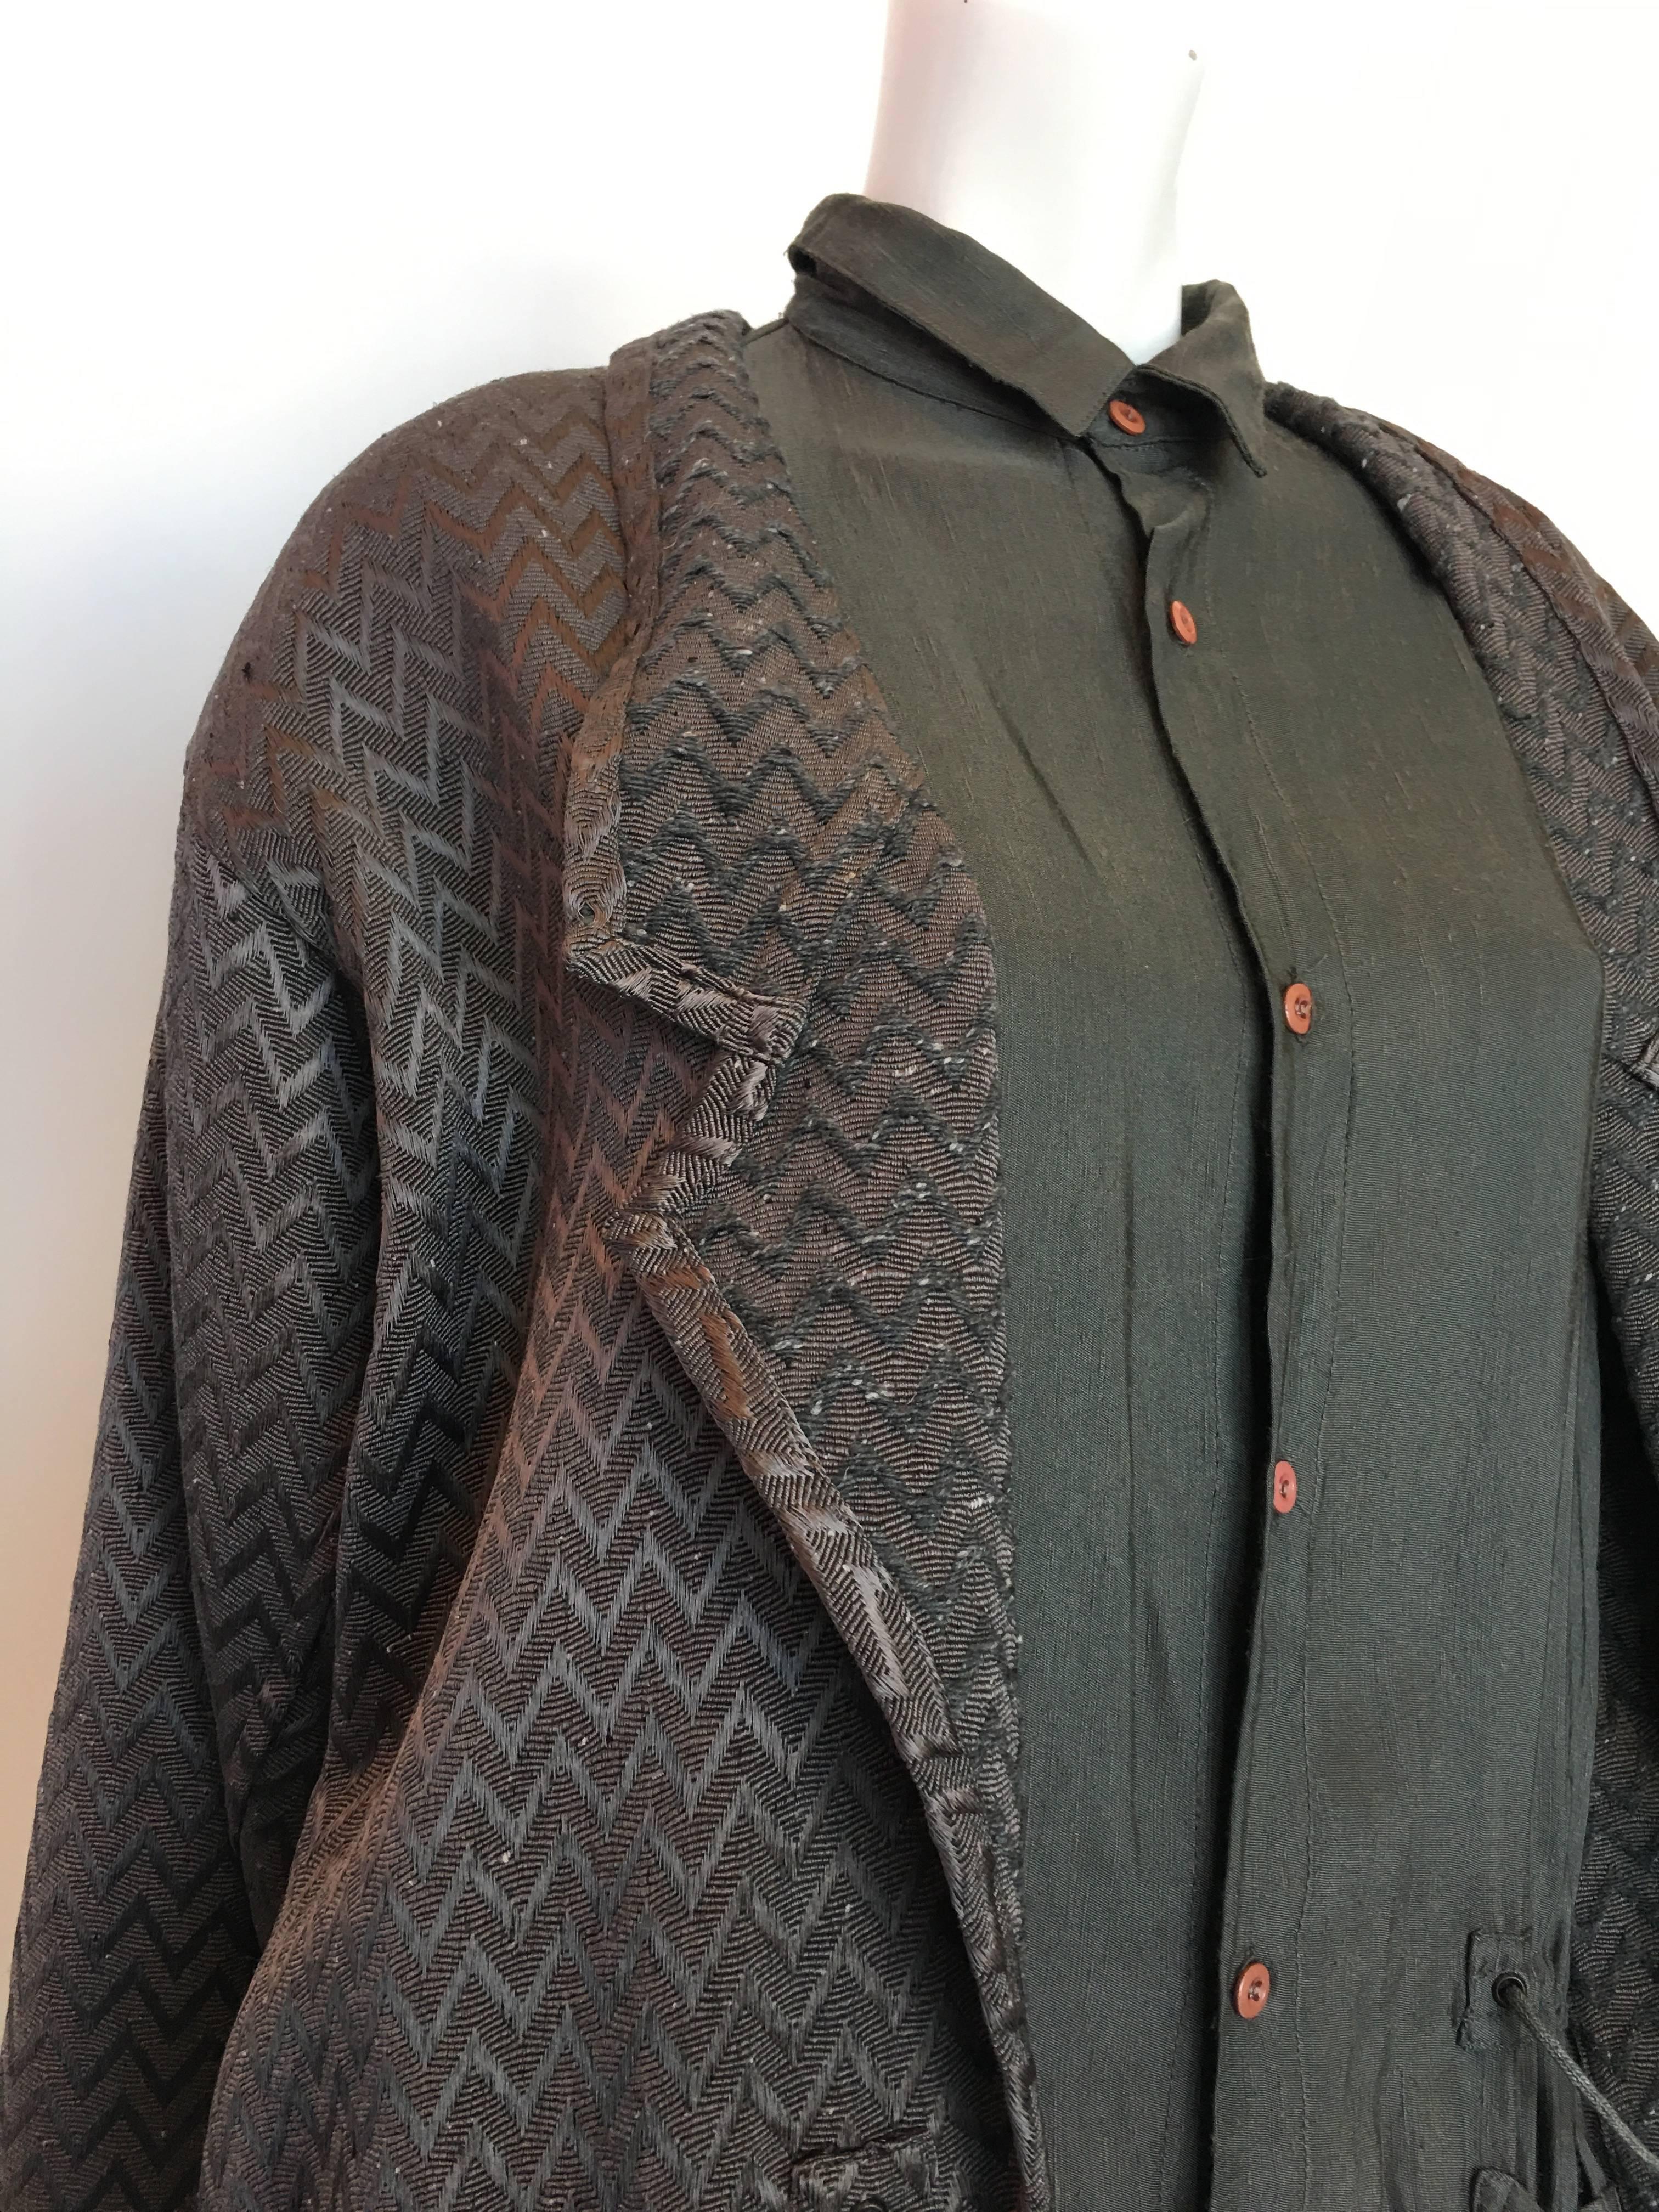 1980s Marithe + Francois Girbaud Oversized Grey Jacquard Jacket & Shirt Set In Good Condition For Sale In Los Angeles, CA